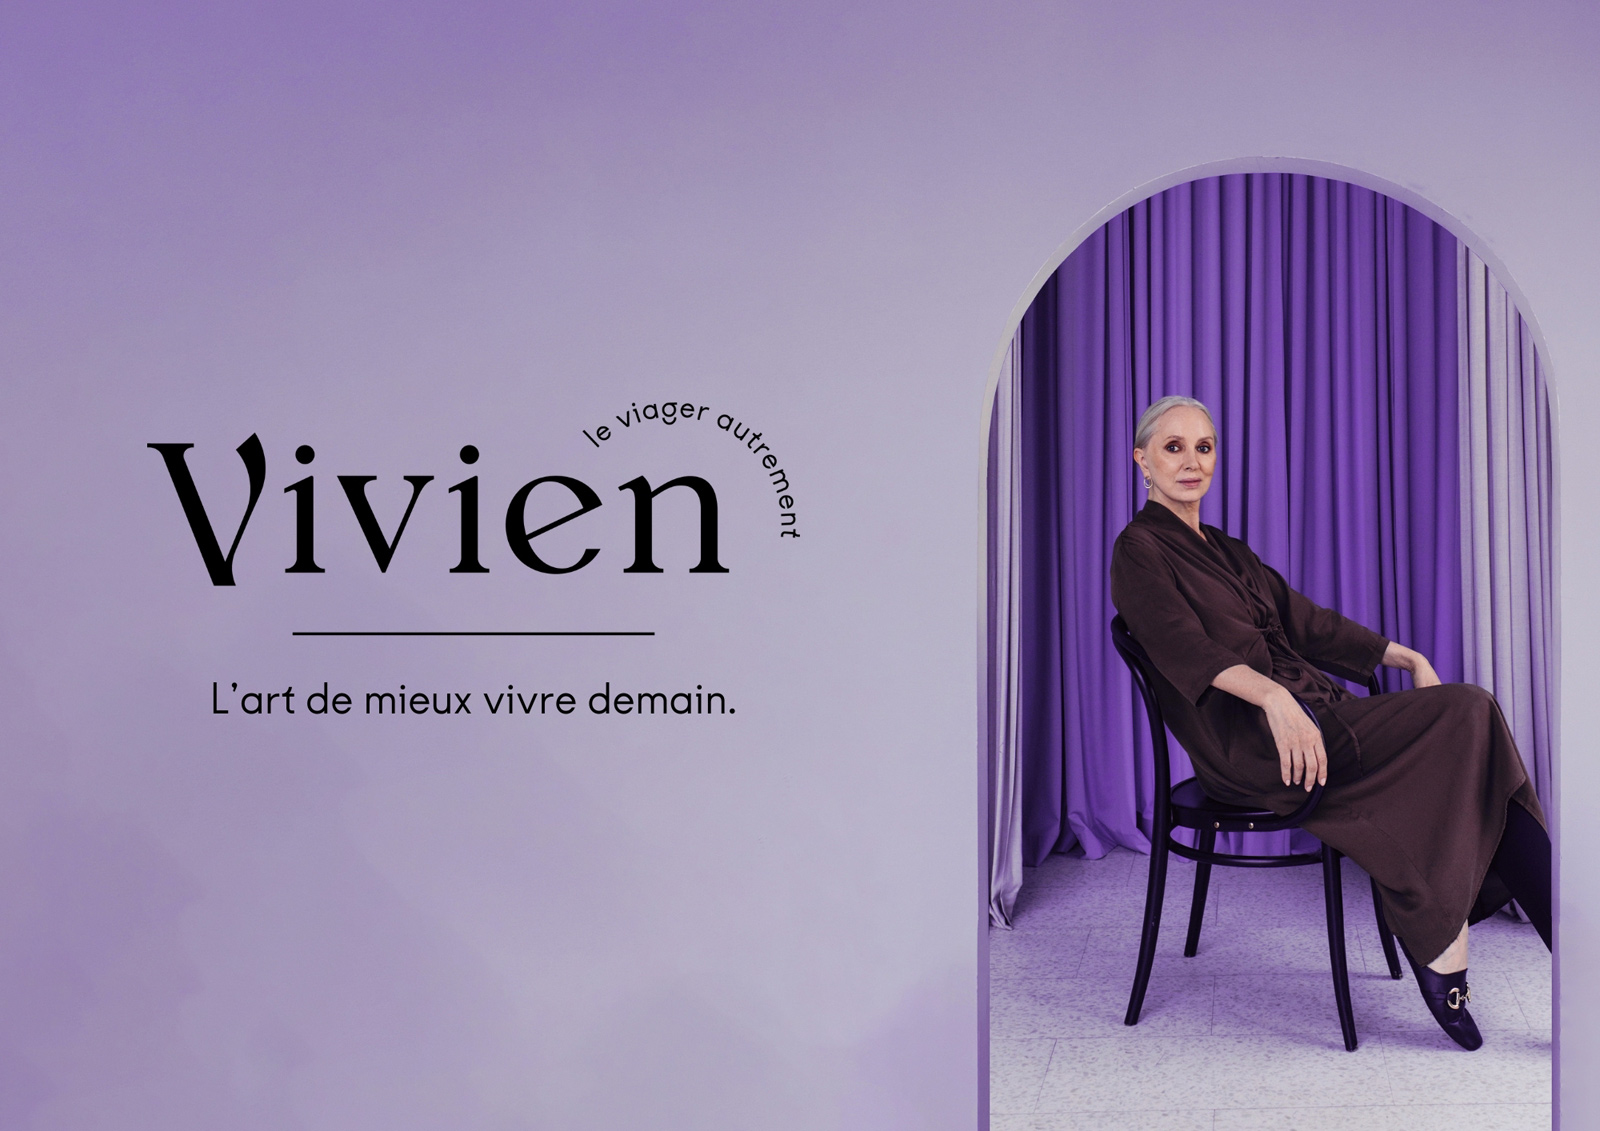 Vivien, the agency specializing in life soluti ...